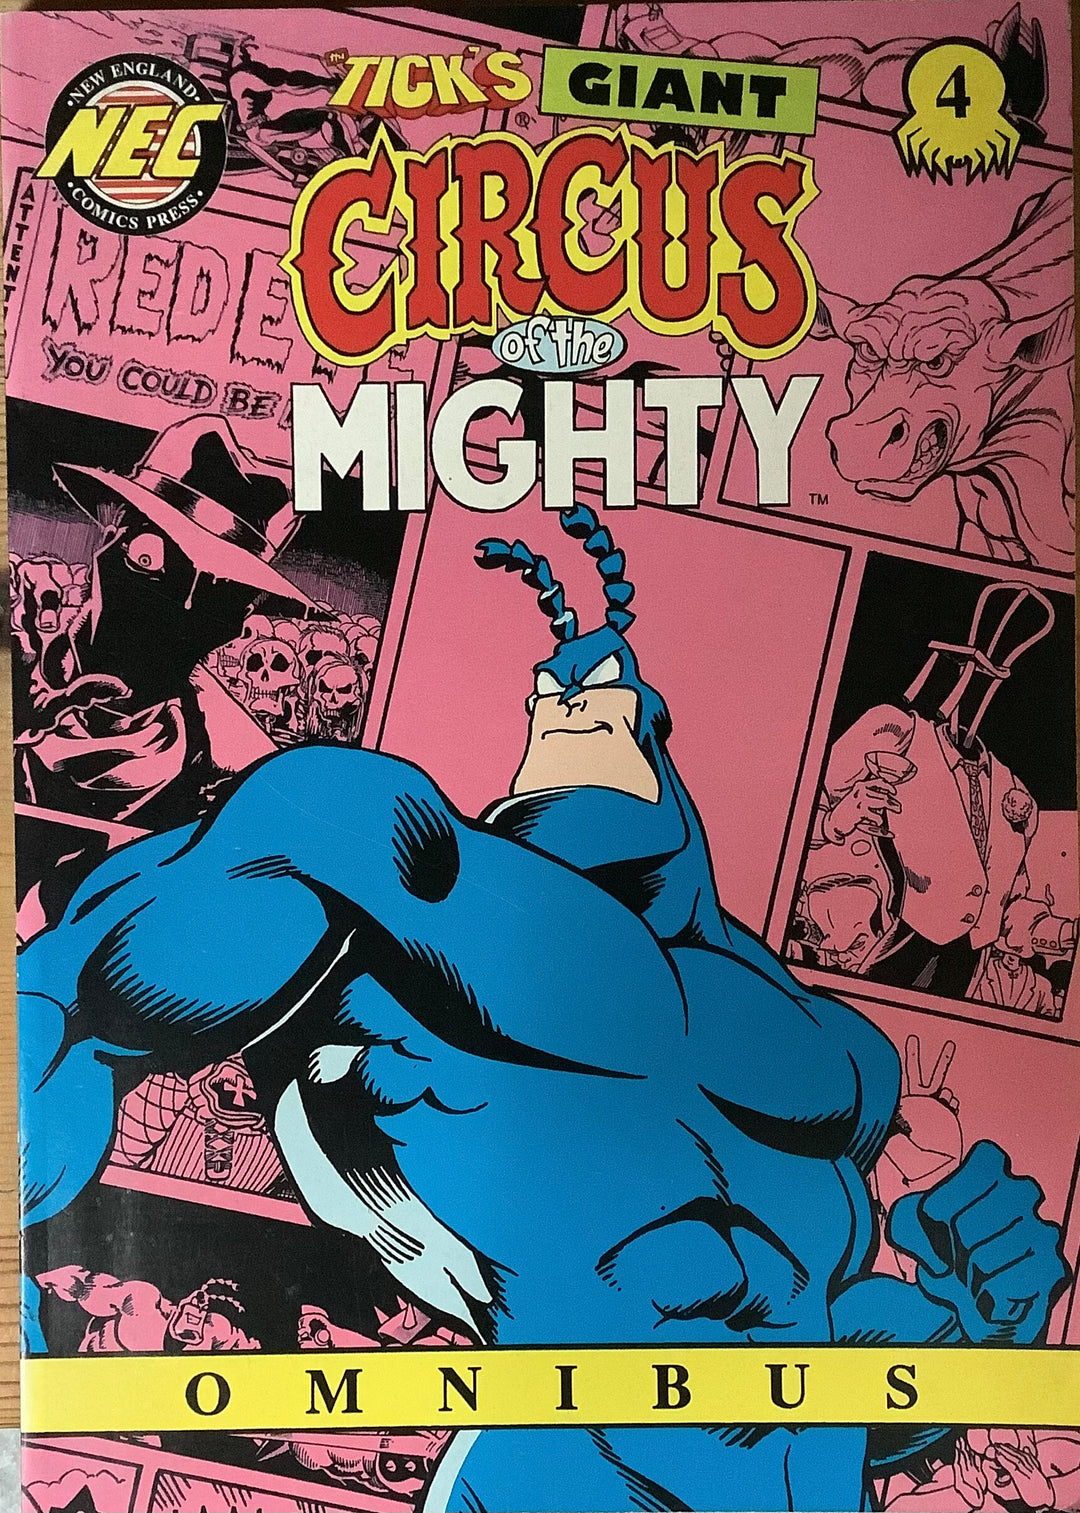 Tick's Giant Omnibus Vol #4 - Circus of the Mighty Graphic Novel OXS-12